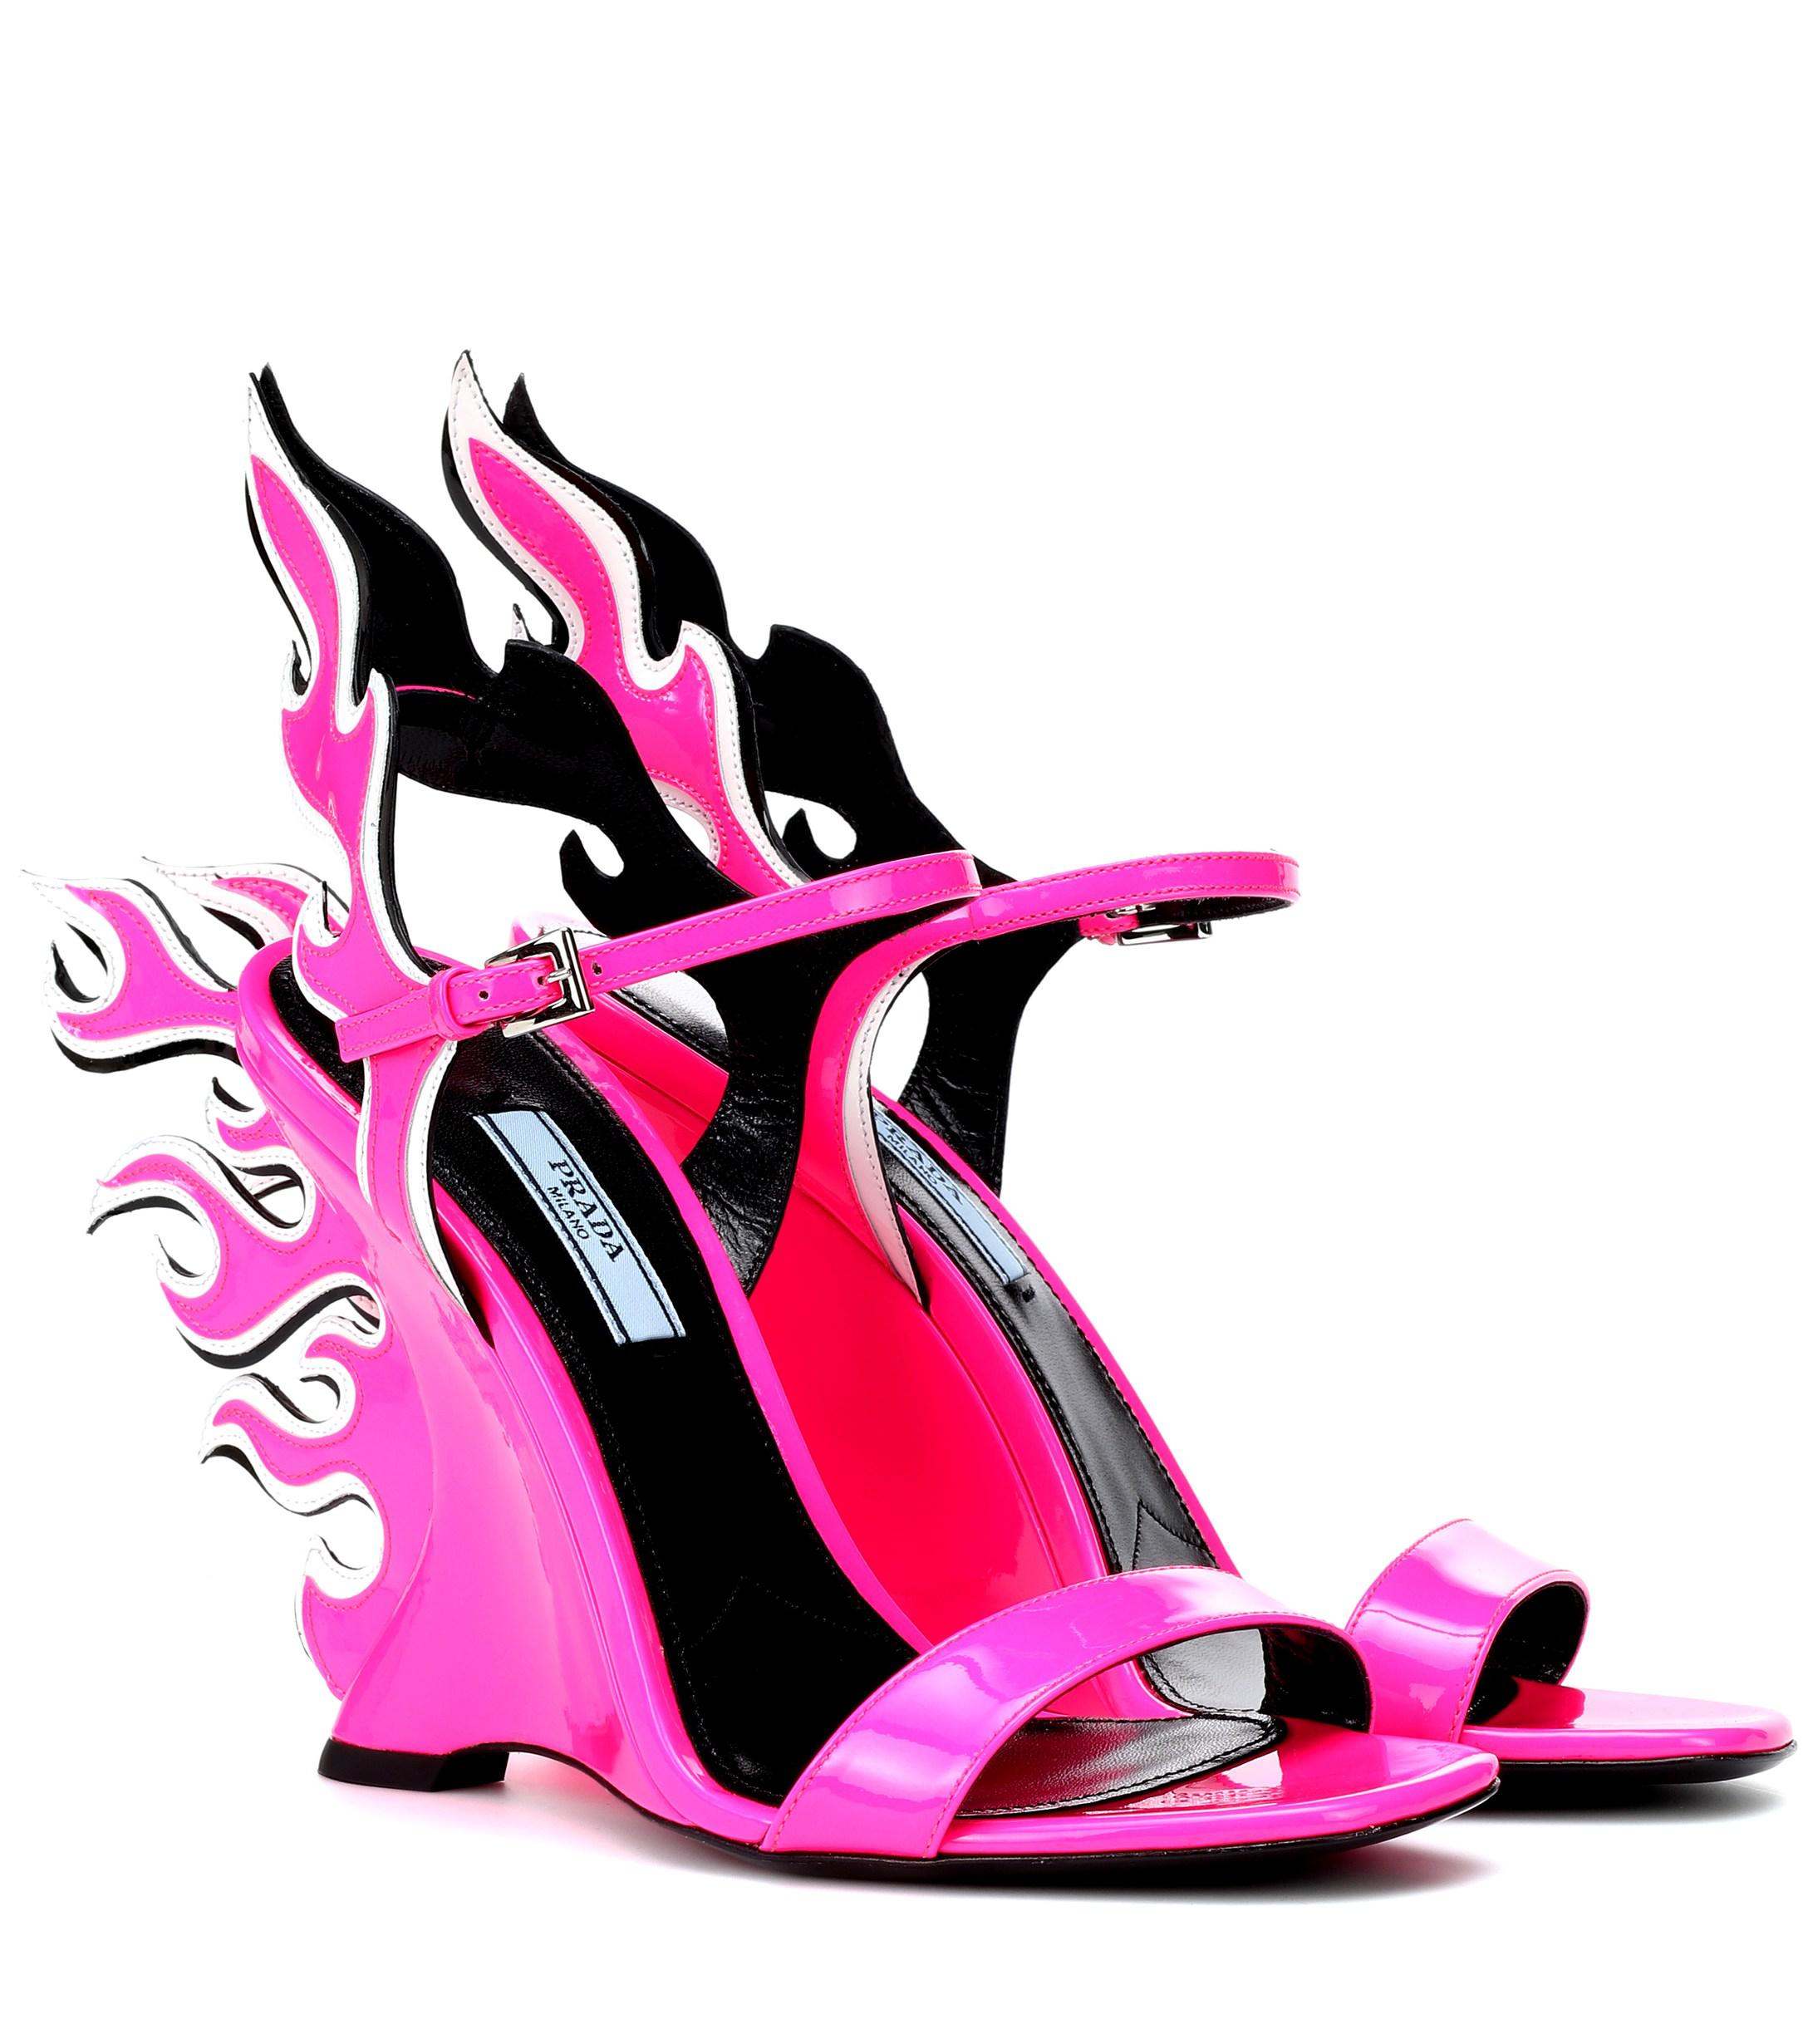 Prada Flame Patent Leather Wedge Sandals in Pink | Lyst